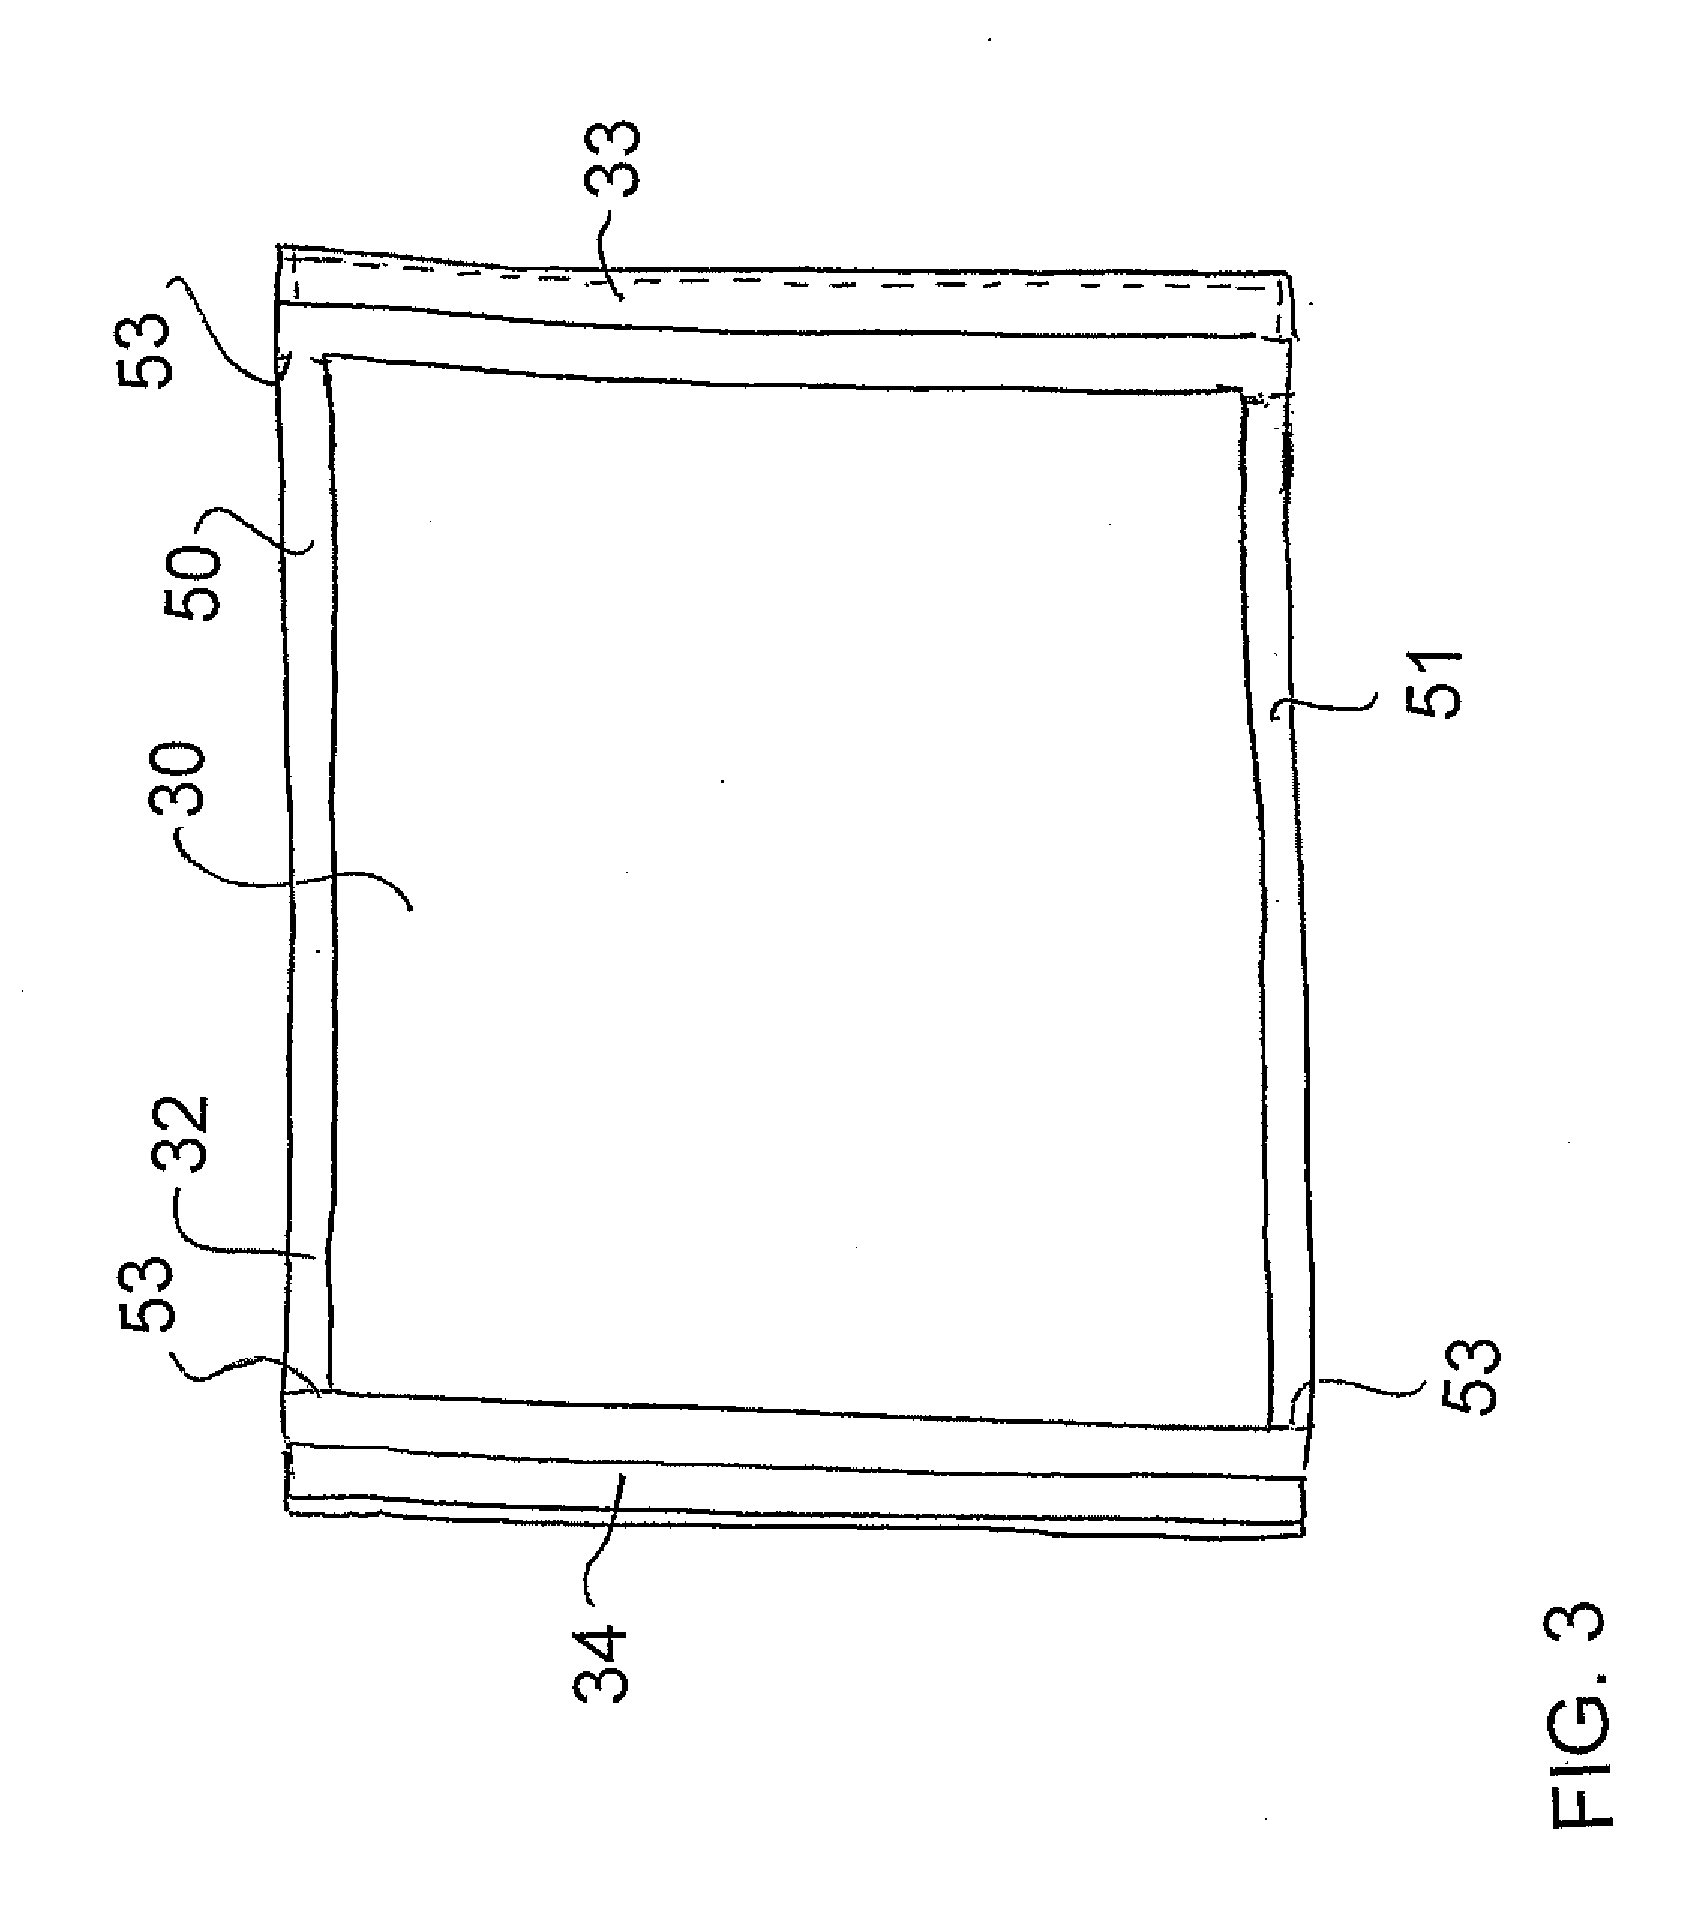 Rig mat system using panels of composite material